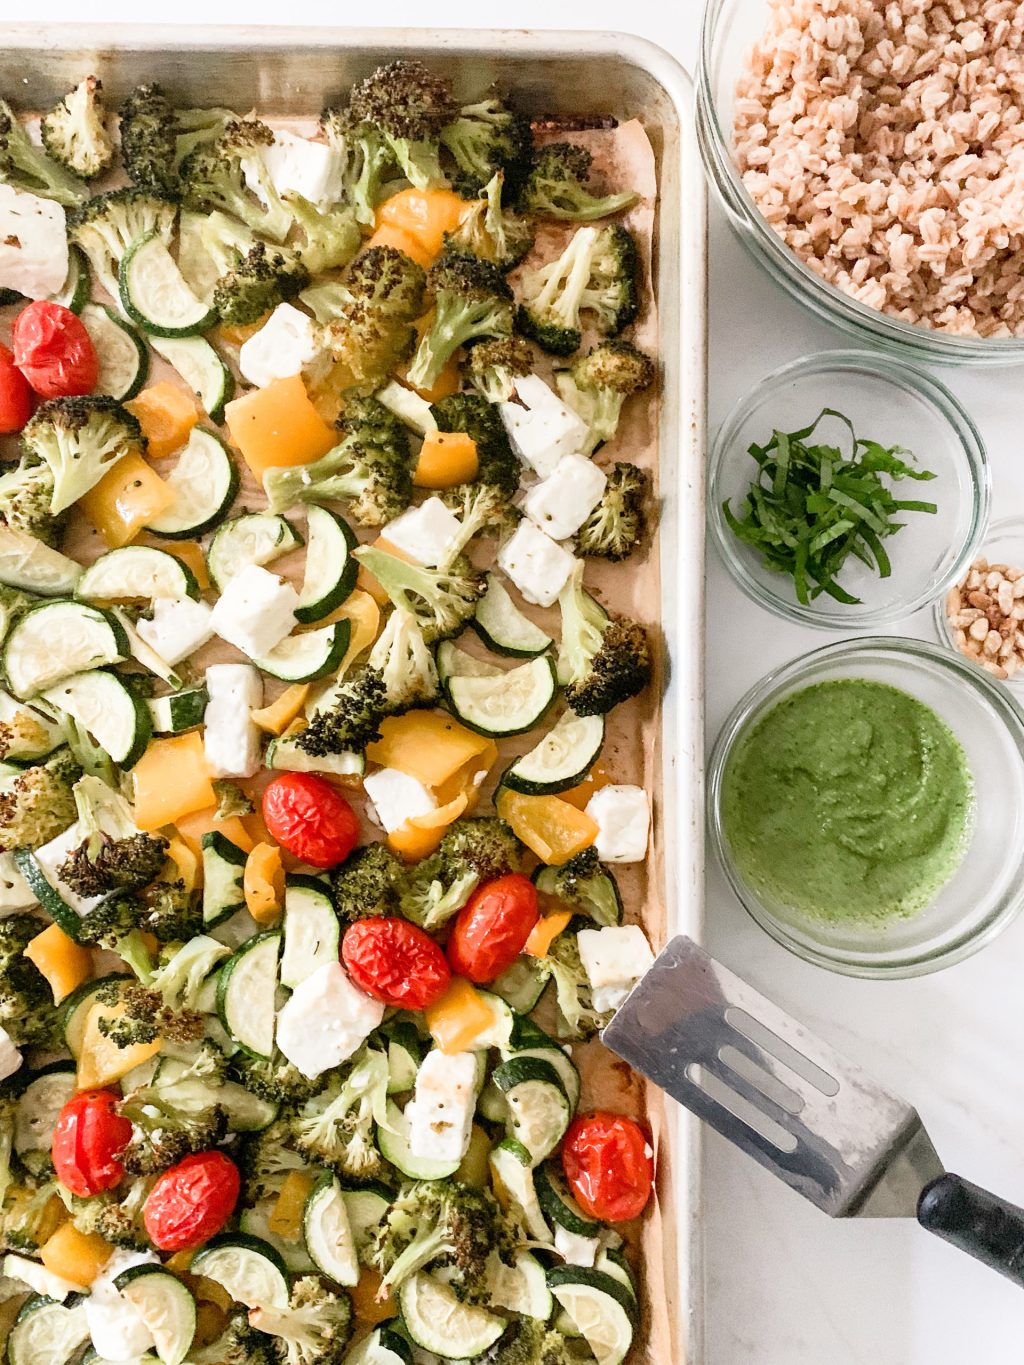 Sheet Pan Baked Feta with Roasted Vegetables